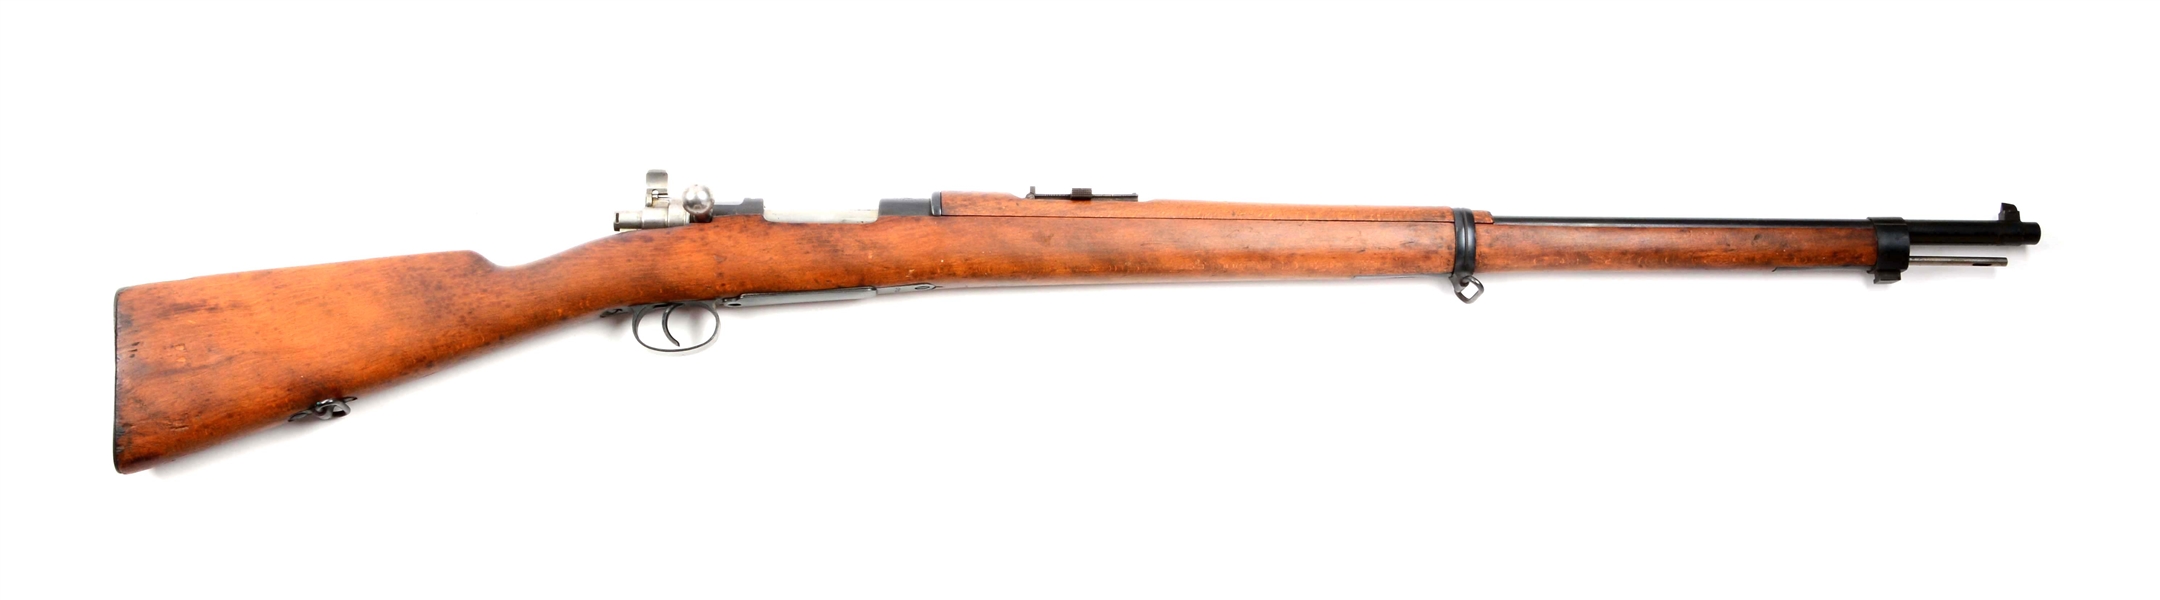 (C) MEXICAN MODEL 1910 MAUSER BOLT ACTION RIFLE. 